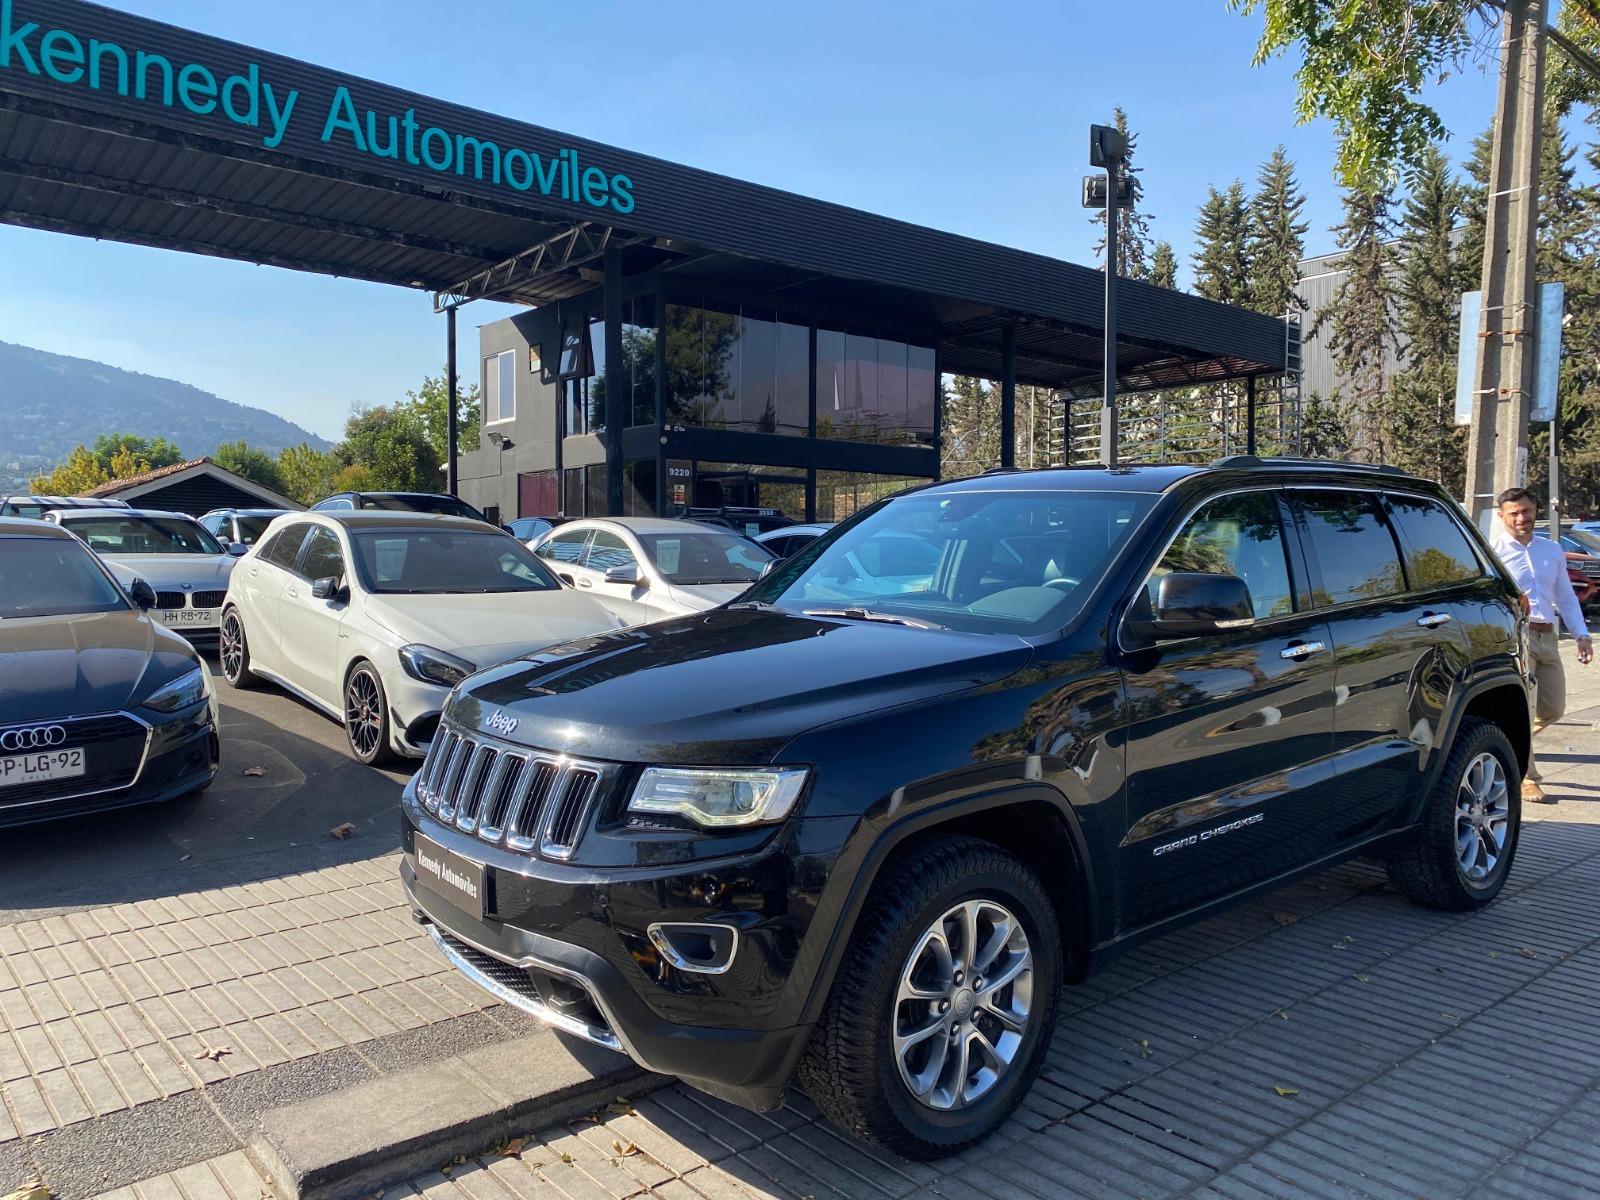 JEEP GRAND CHEROKEE 3.6 Limited 4WD Auto 2017 Impecable - KENNEDY AUTOMOVILES